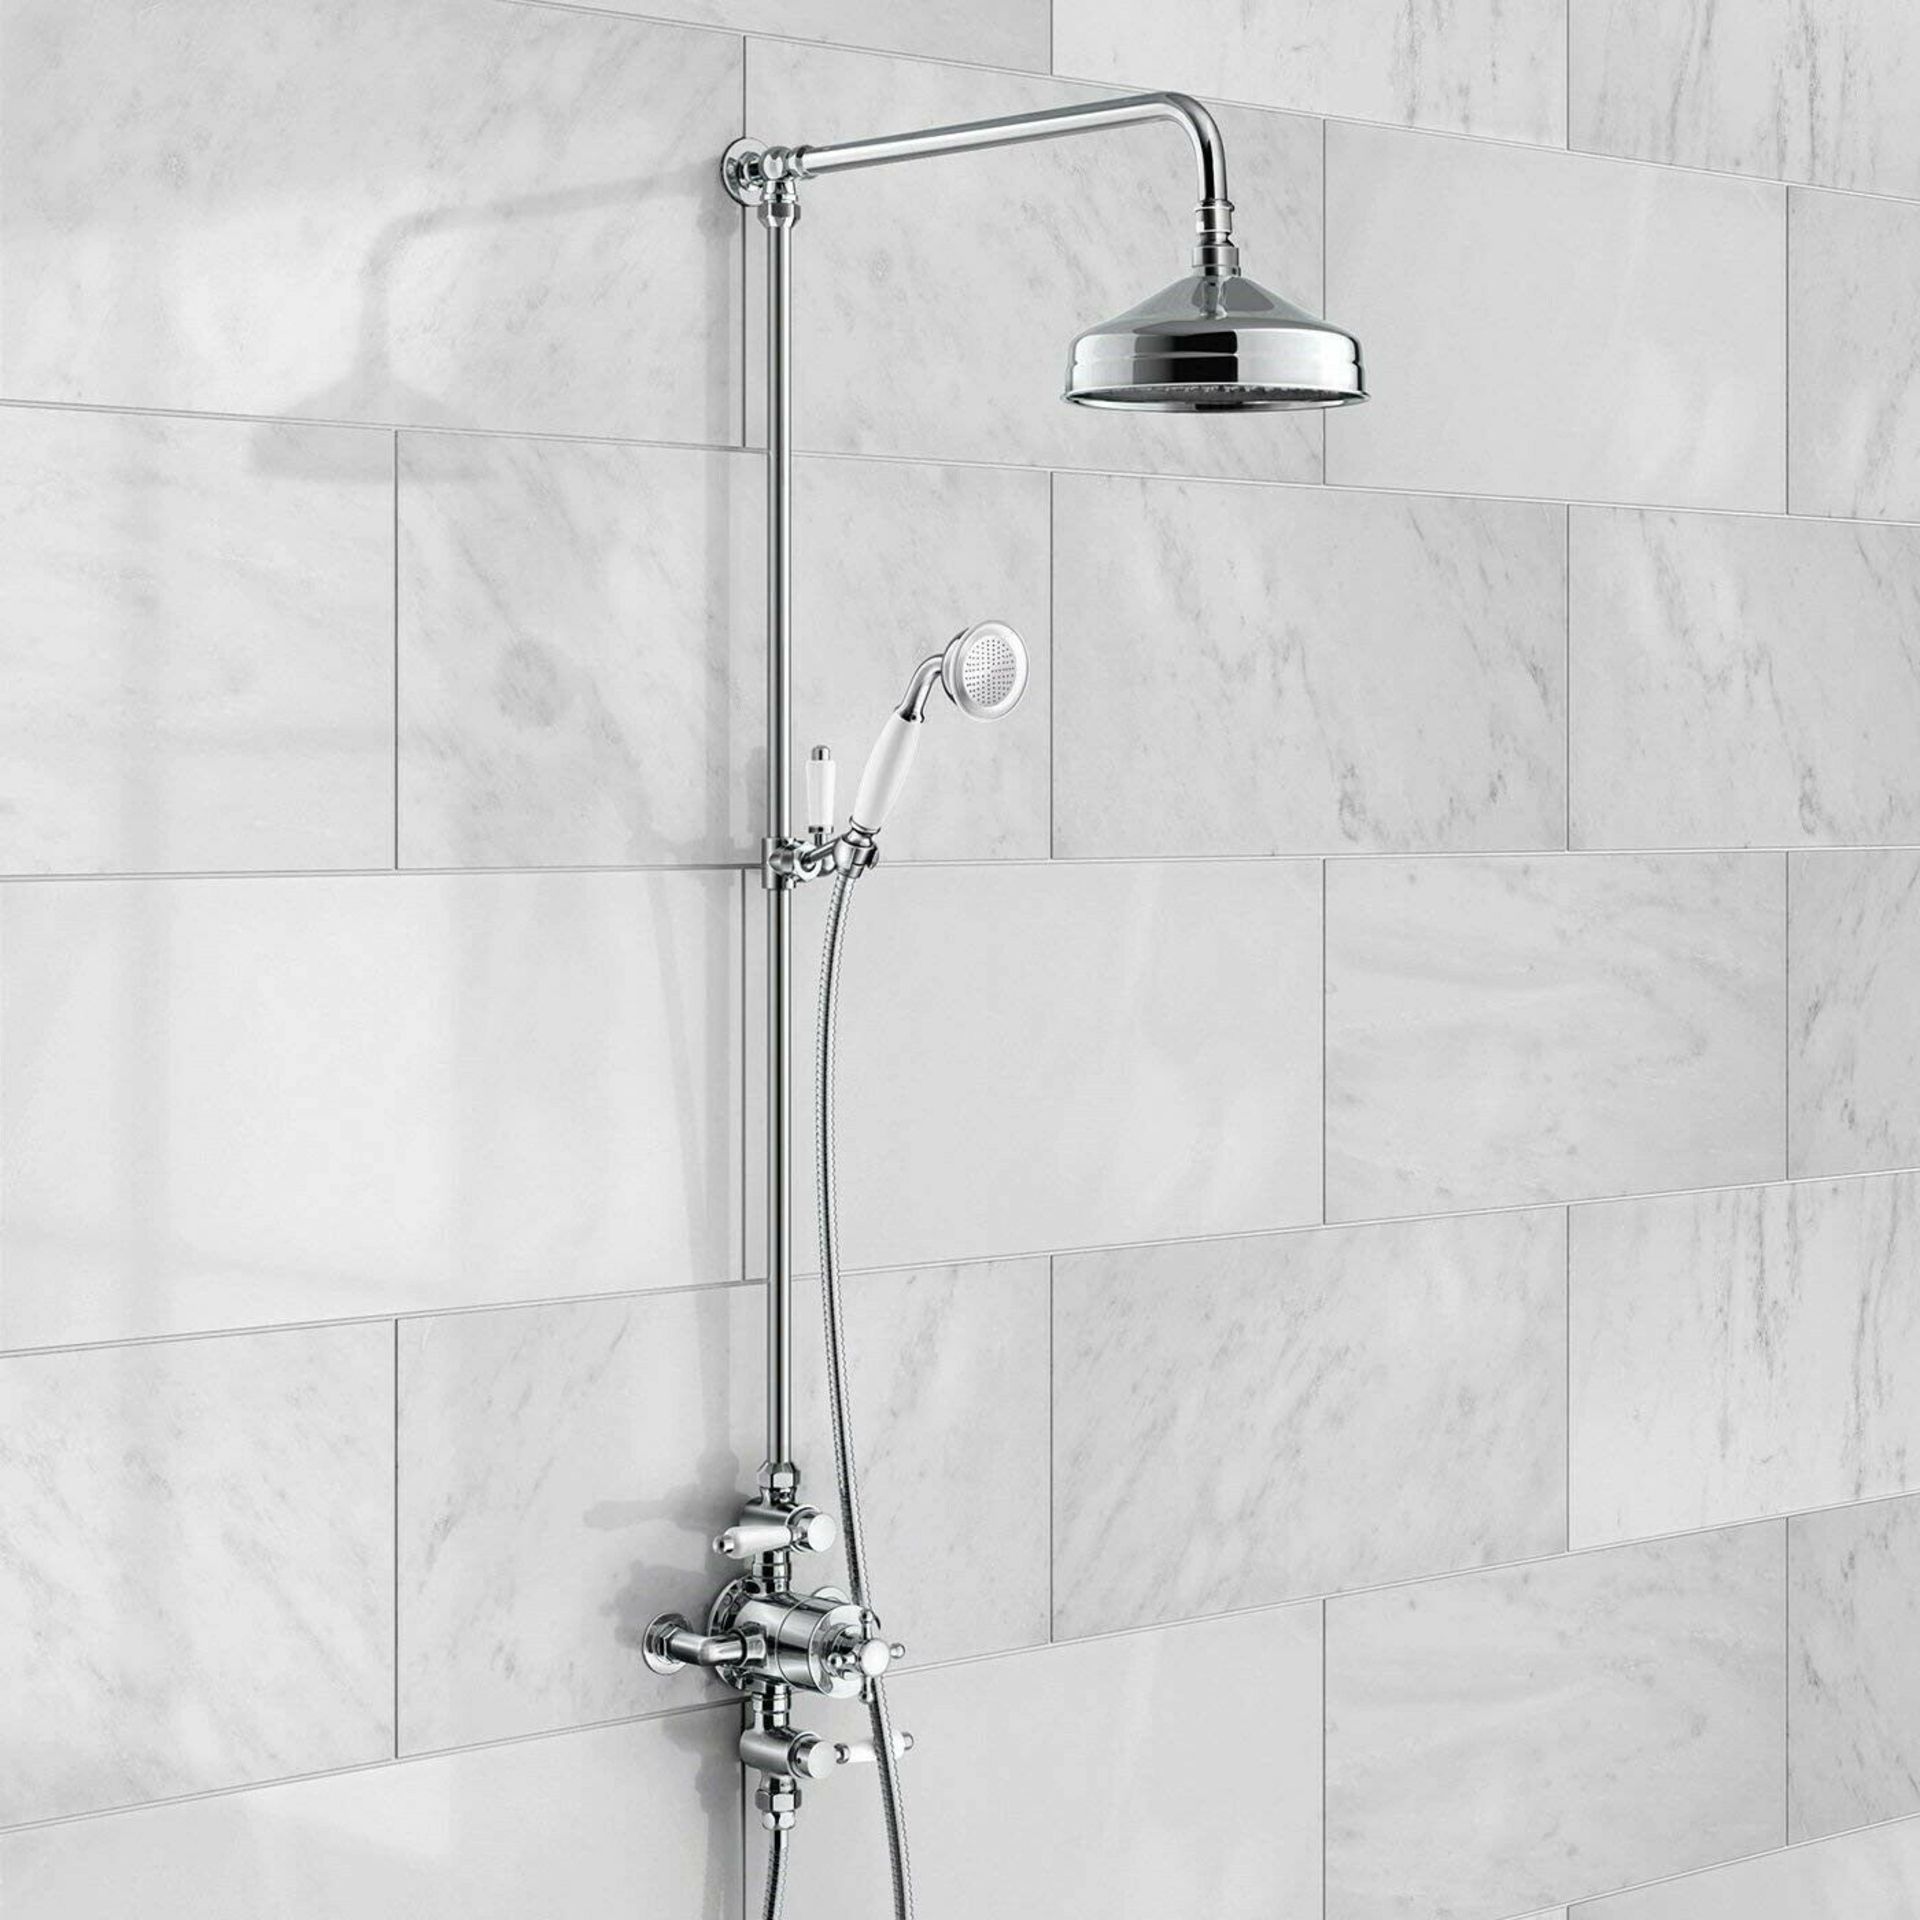 NEW (F34) Exposed Dual Traditional Thermostatic Shower Mixer + Rigid Riser + Diverter. RRP £49...